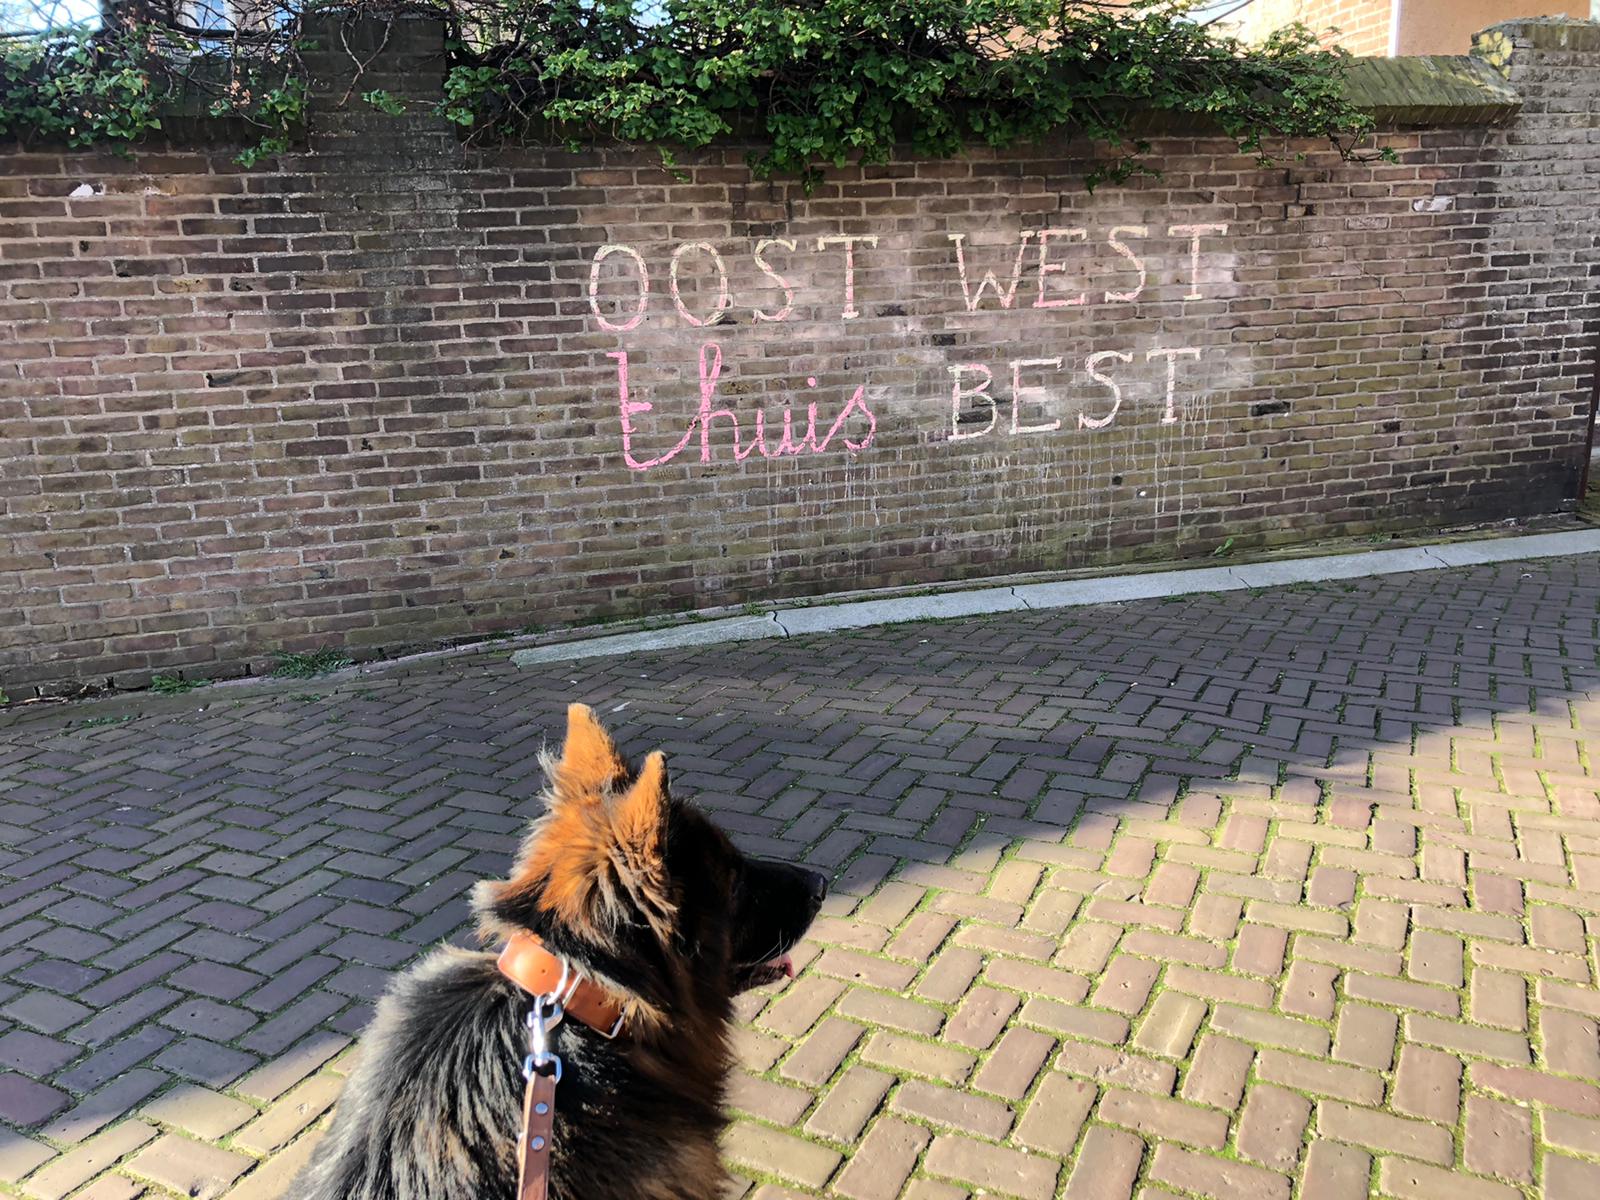 Oost west thuis best